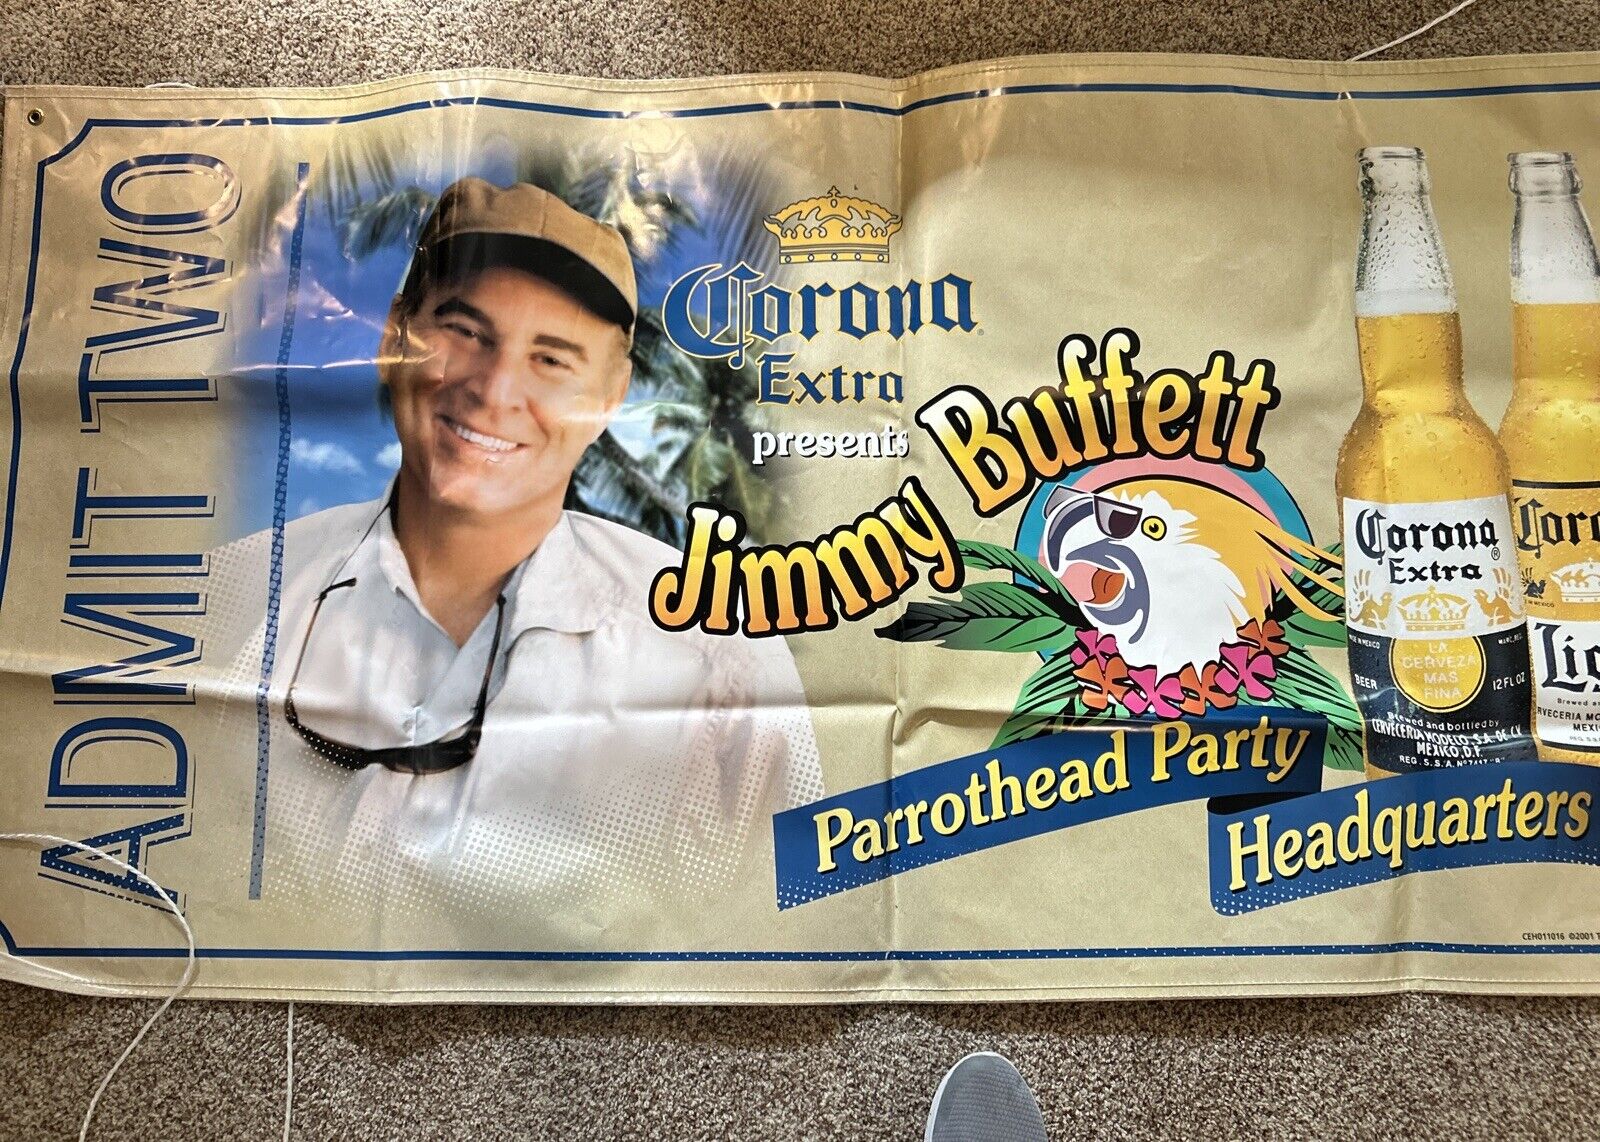 New Large Corona Advertising Banner Jimmy Buffett Parrothead Party 6 ft. x 3 ft.